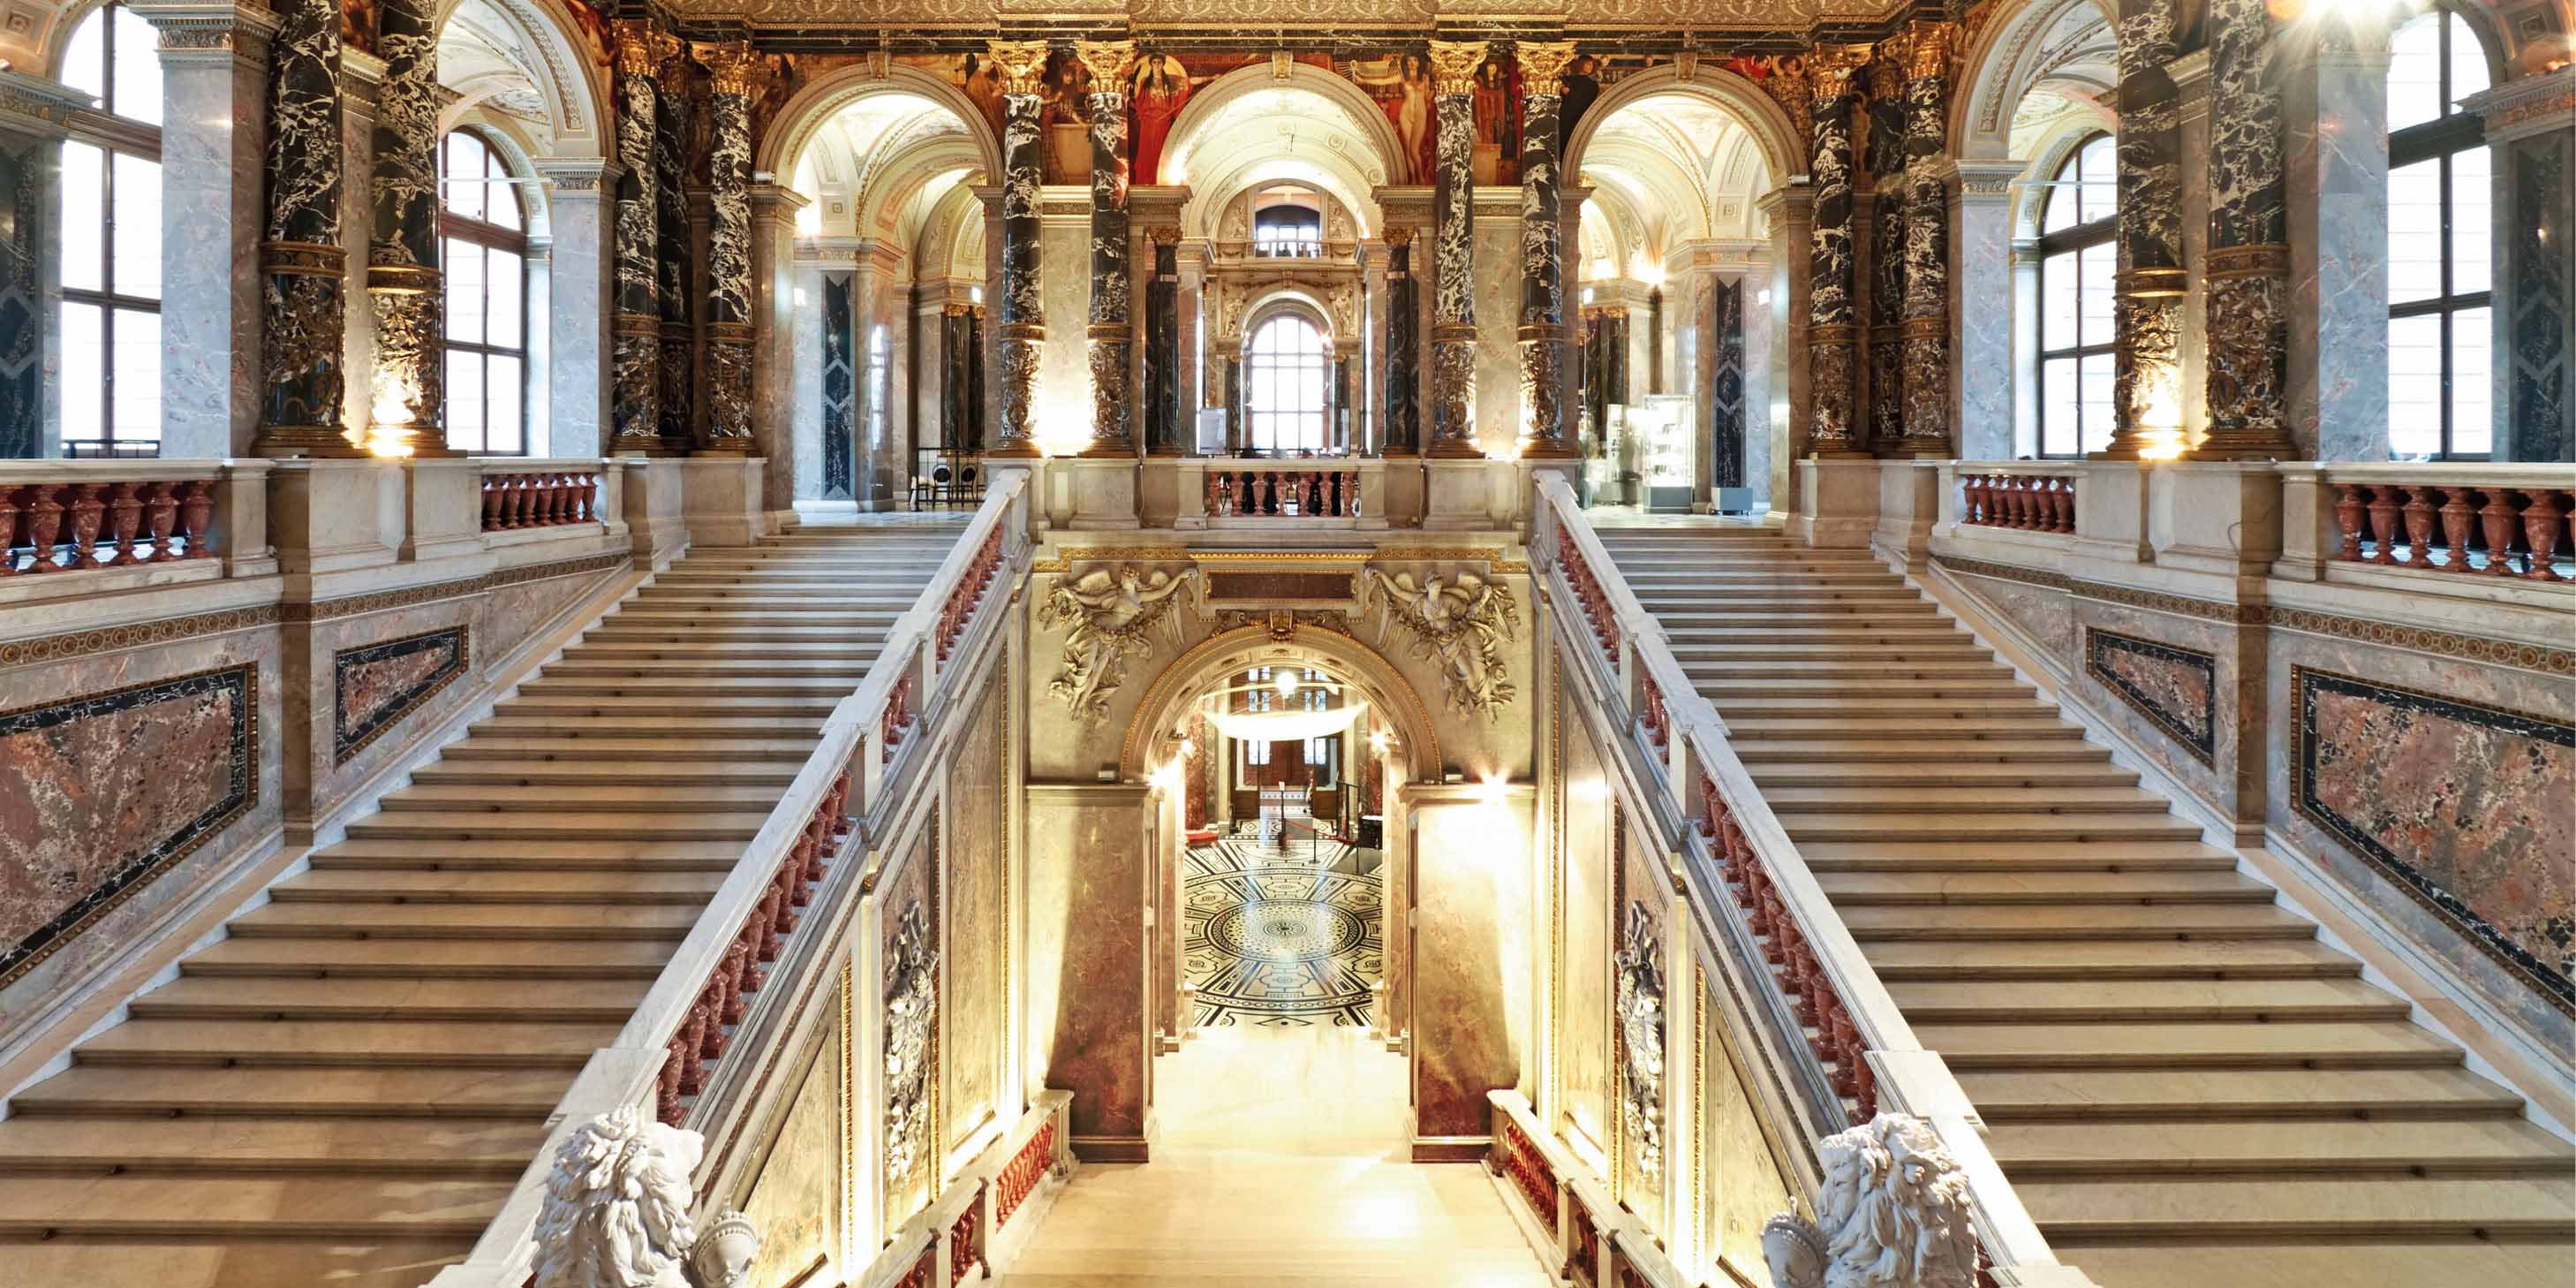 The grand staircases, archways, and ceiling of Kunsthistorisches Museum located in Vienna, Austria